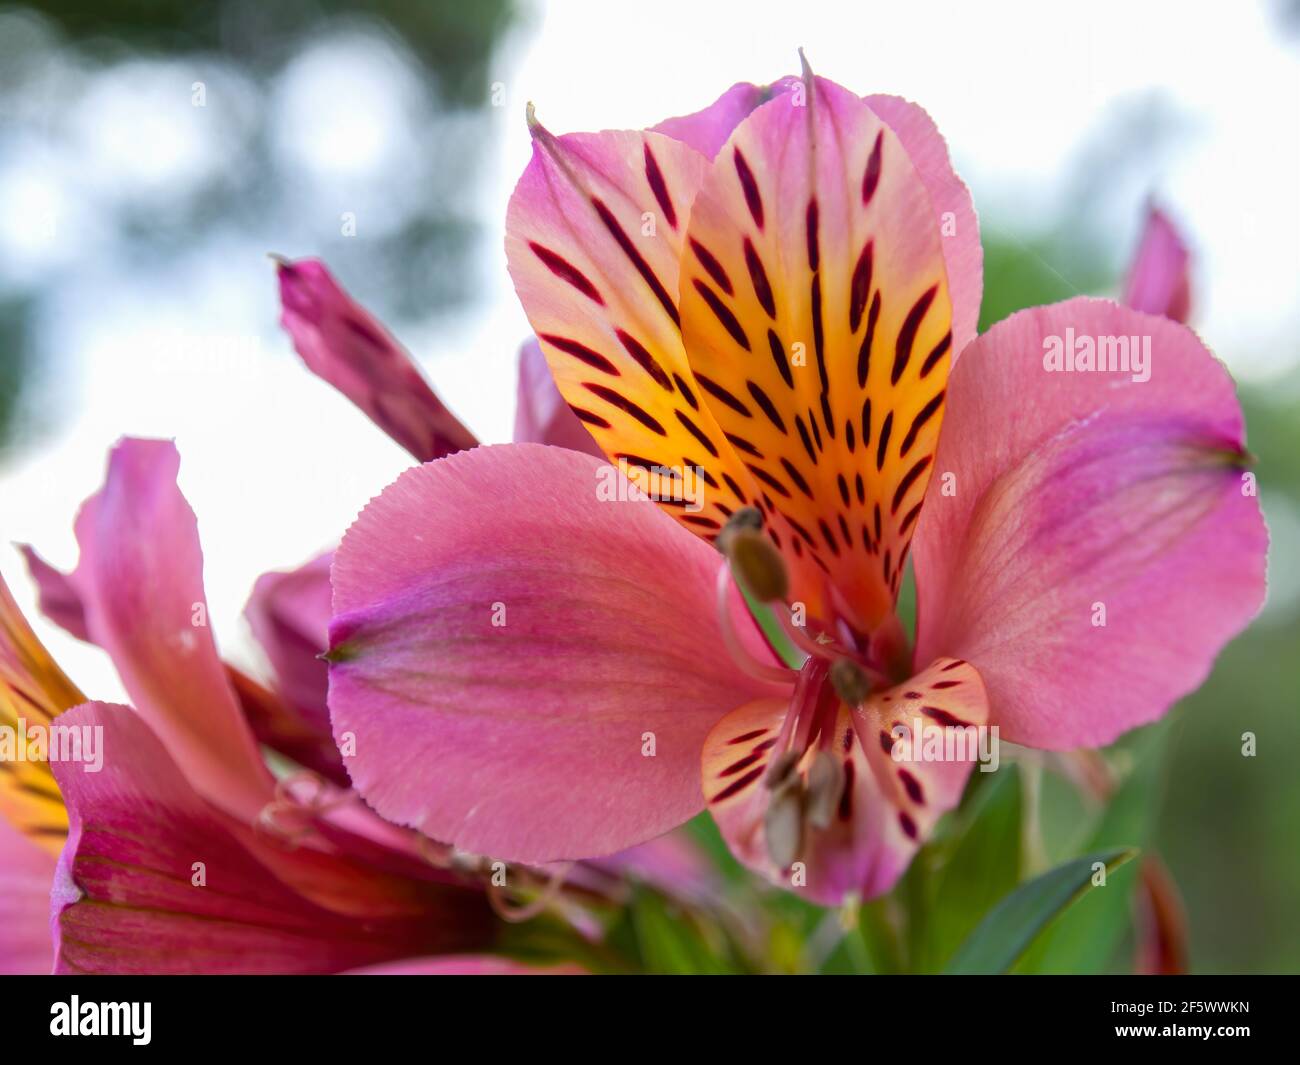 Macro-photography of peruvian lily flowers, alstroemeria saturne, captured at a garden near the colonial town of Villa de Leyva, Colombia. Stock Photo